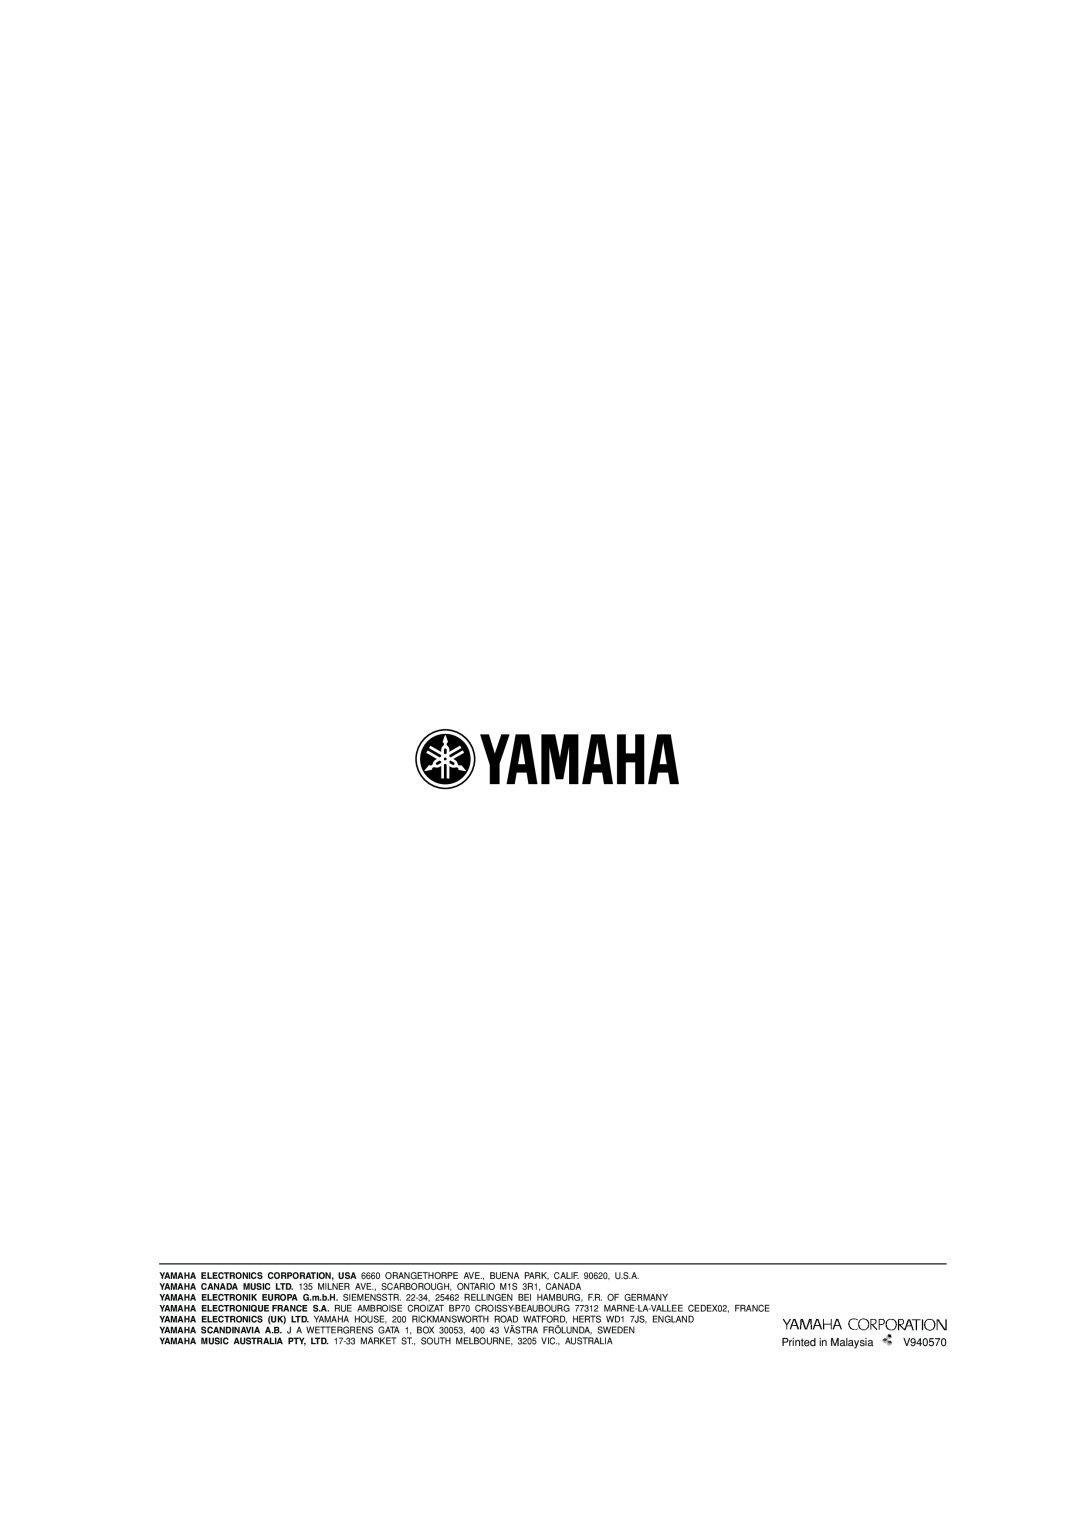 Yamaha AVX-S80, HOMETHEATER SOUND SYSTEM owner manual Printed in Malaysia, V940570 